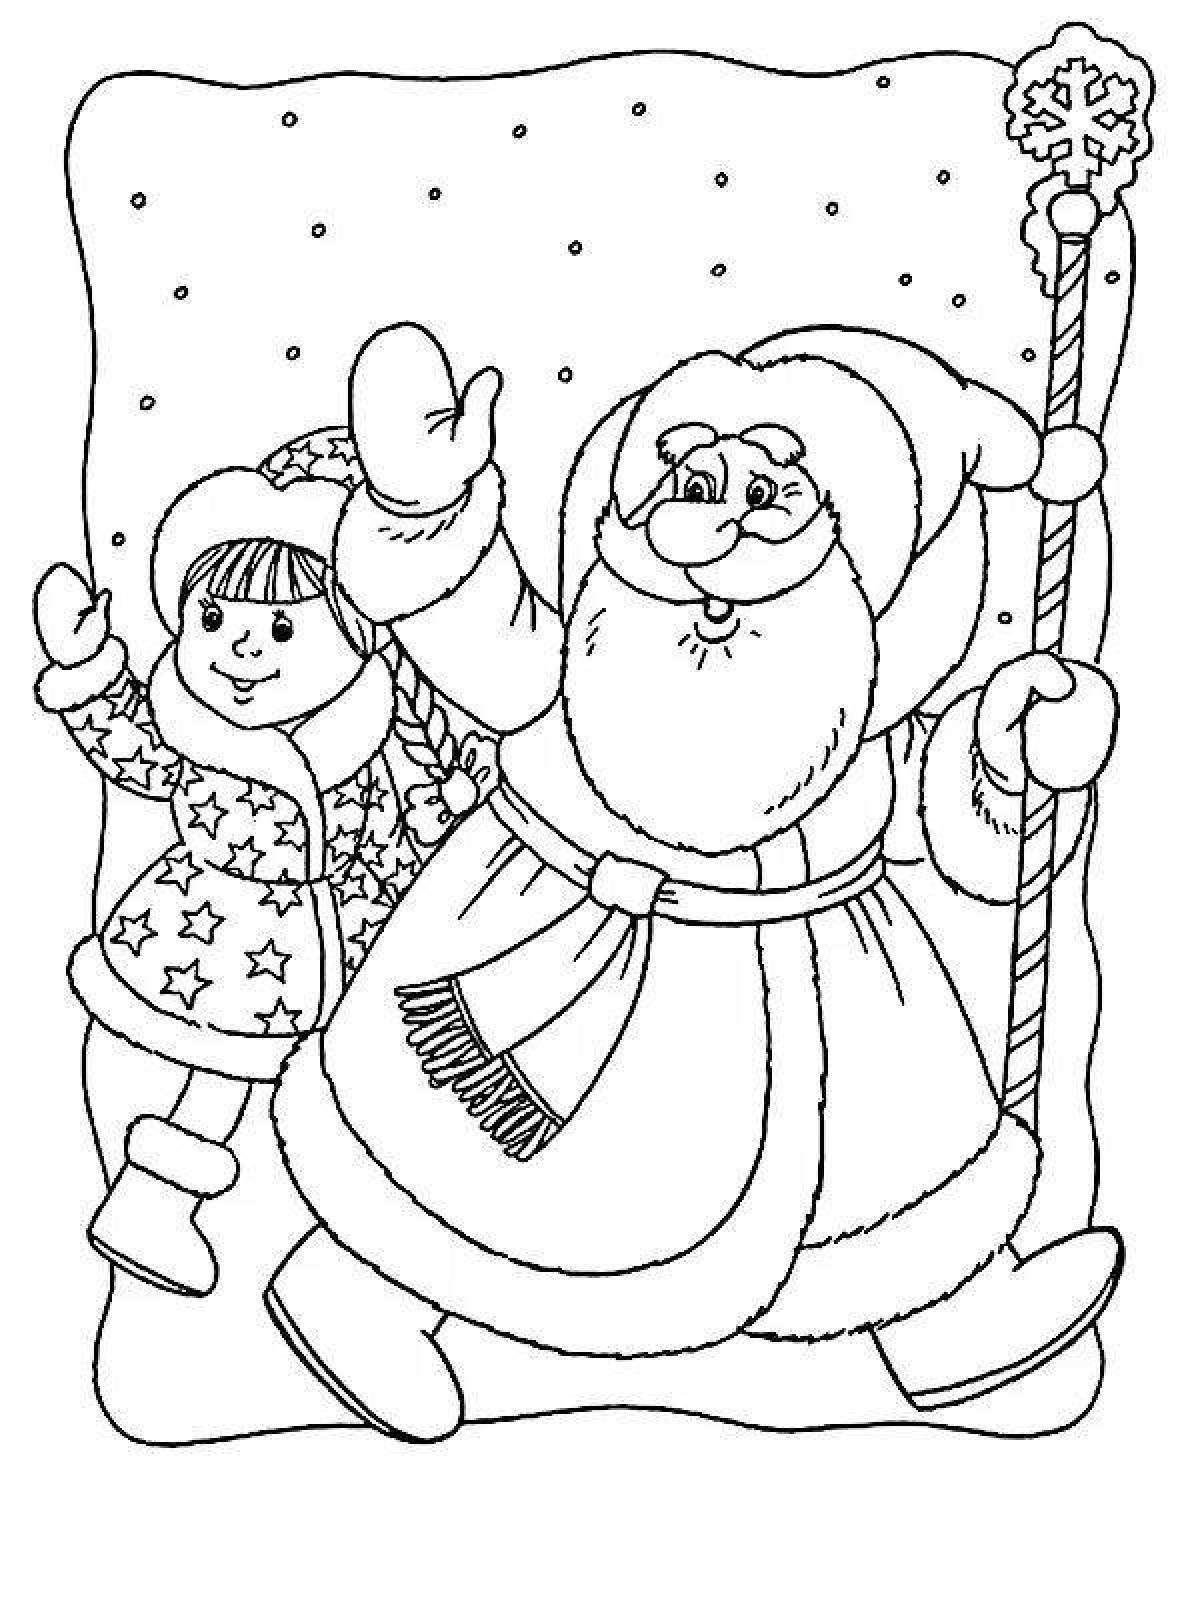 Christmas coloring book radiant Santa Claus and Snow Maiden